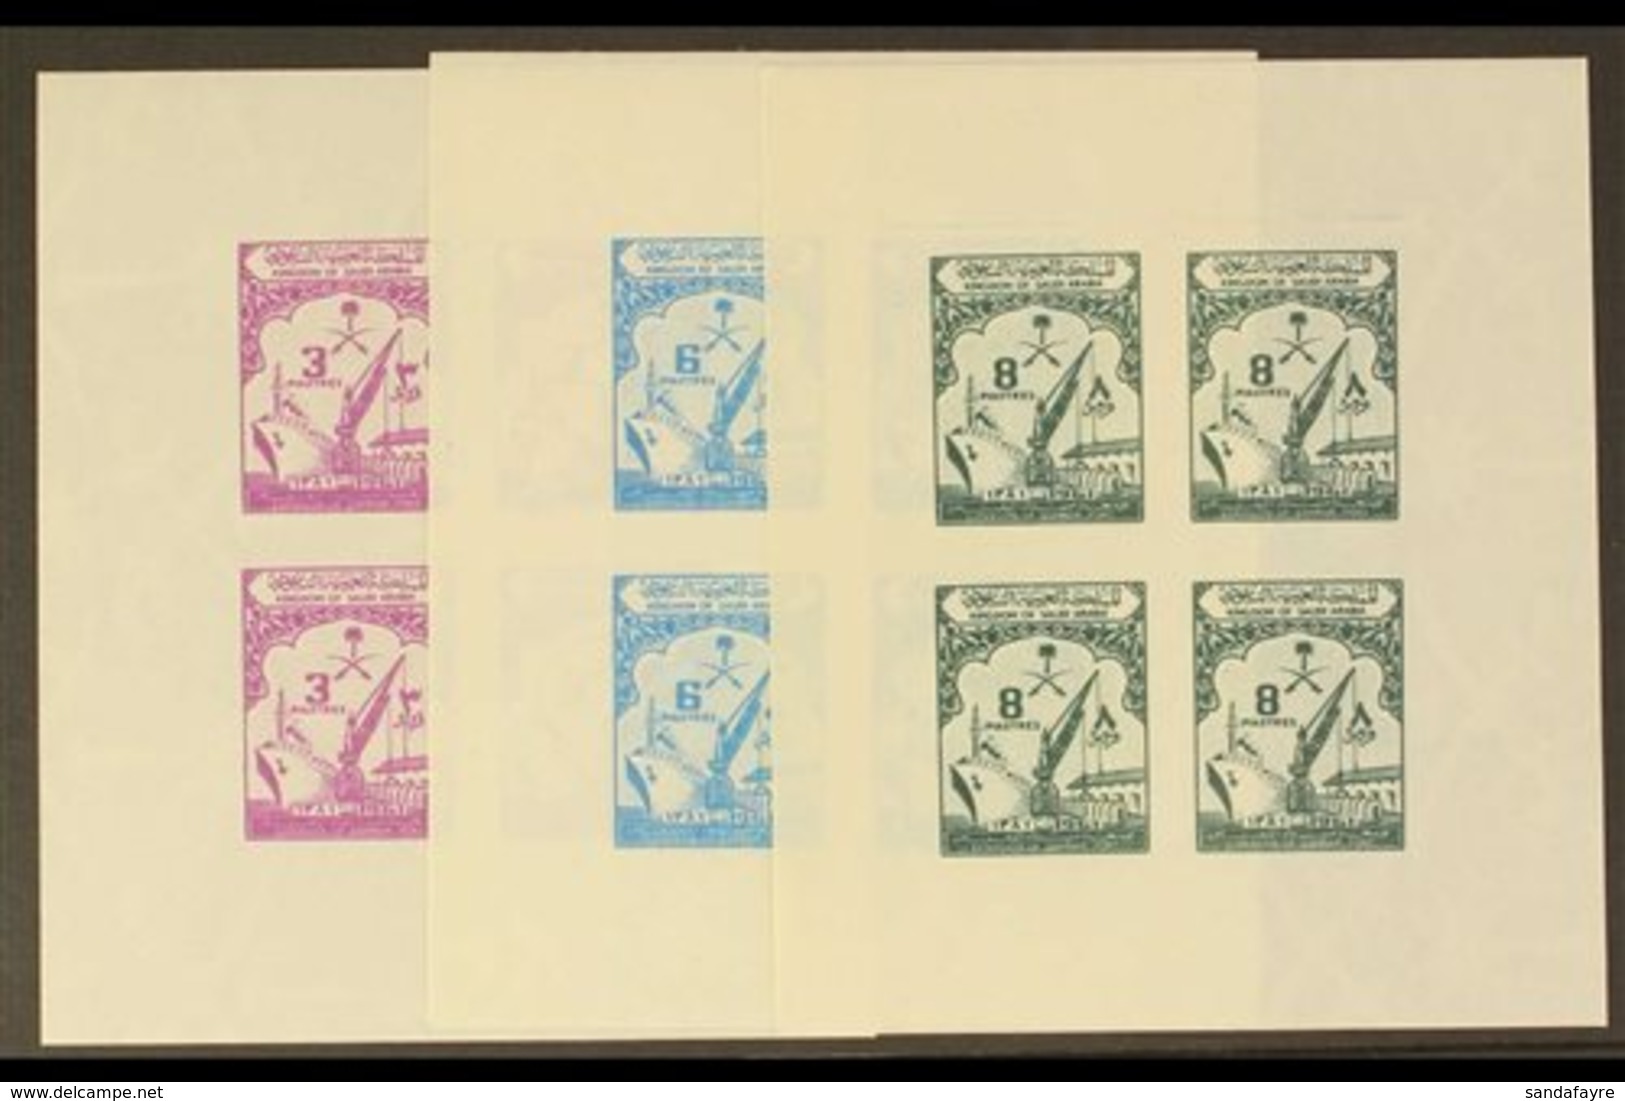 1961 1961 Opening Of Dammam Port Extension Set Of Three As IMPERFORATE MINIATURE SHEETS With Watermark Sideways And Each - Arabia Saudita